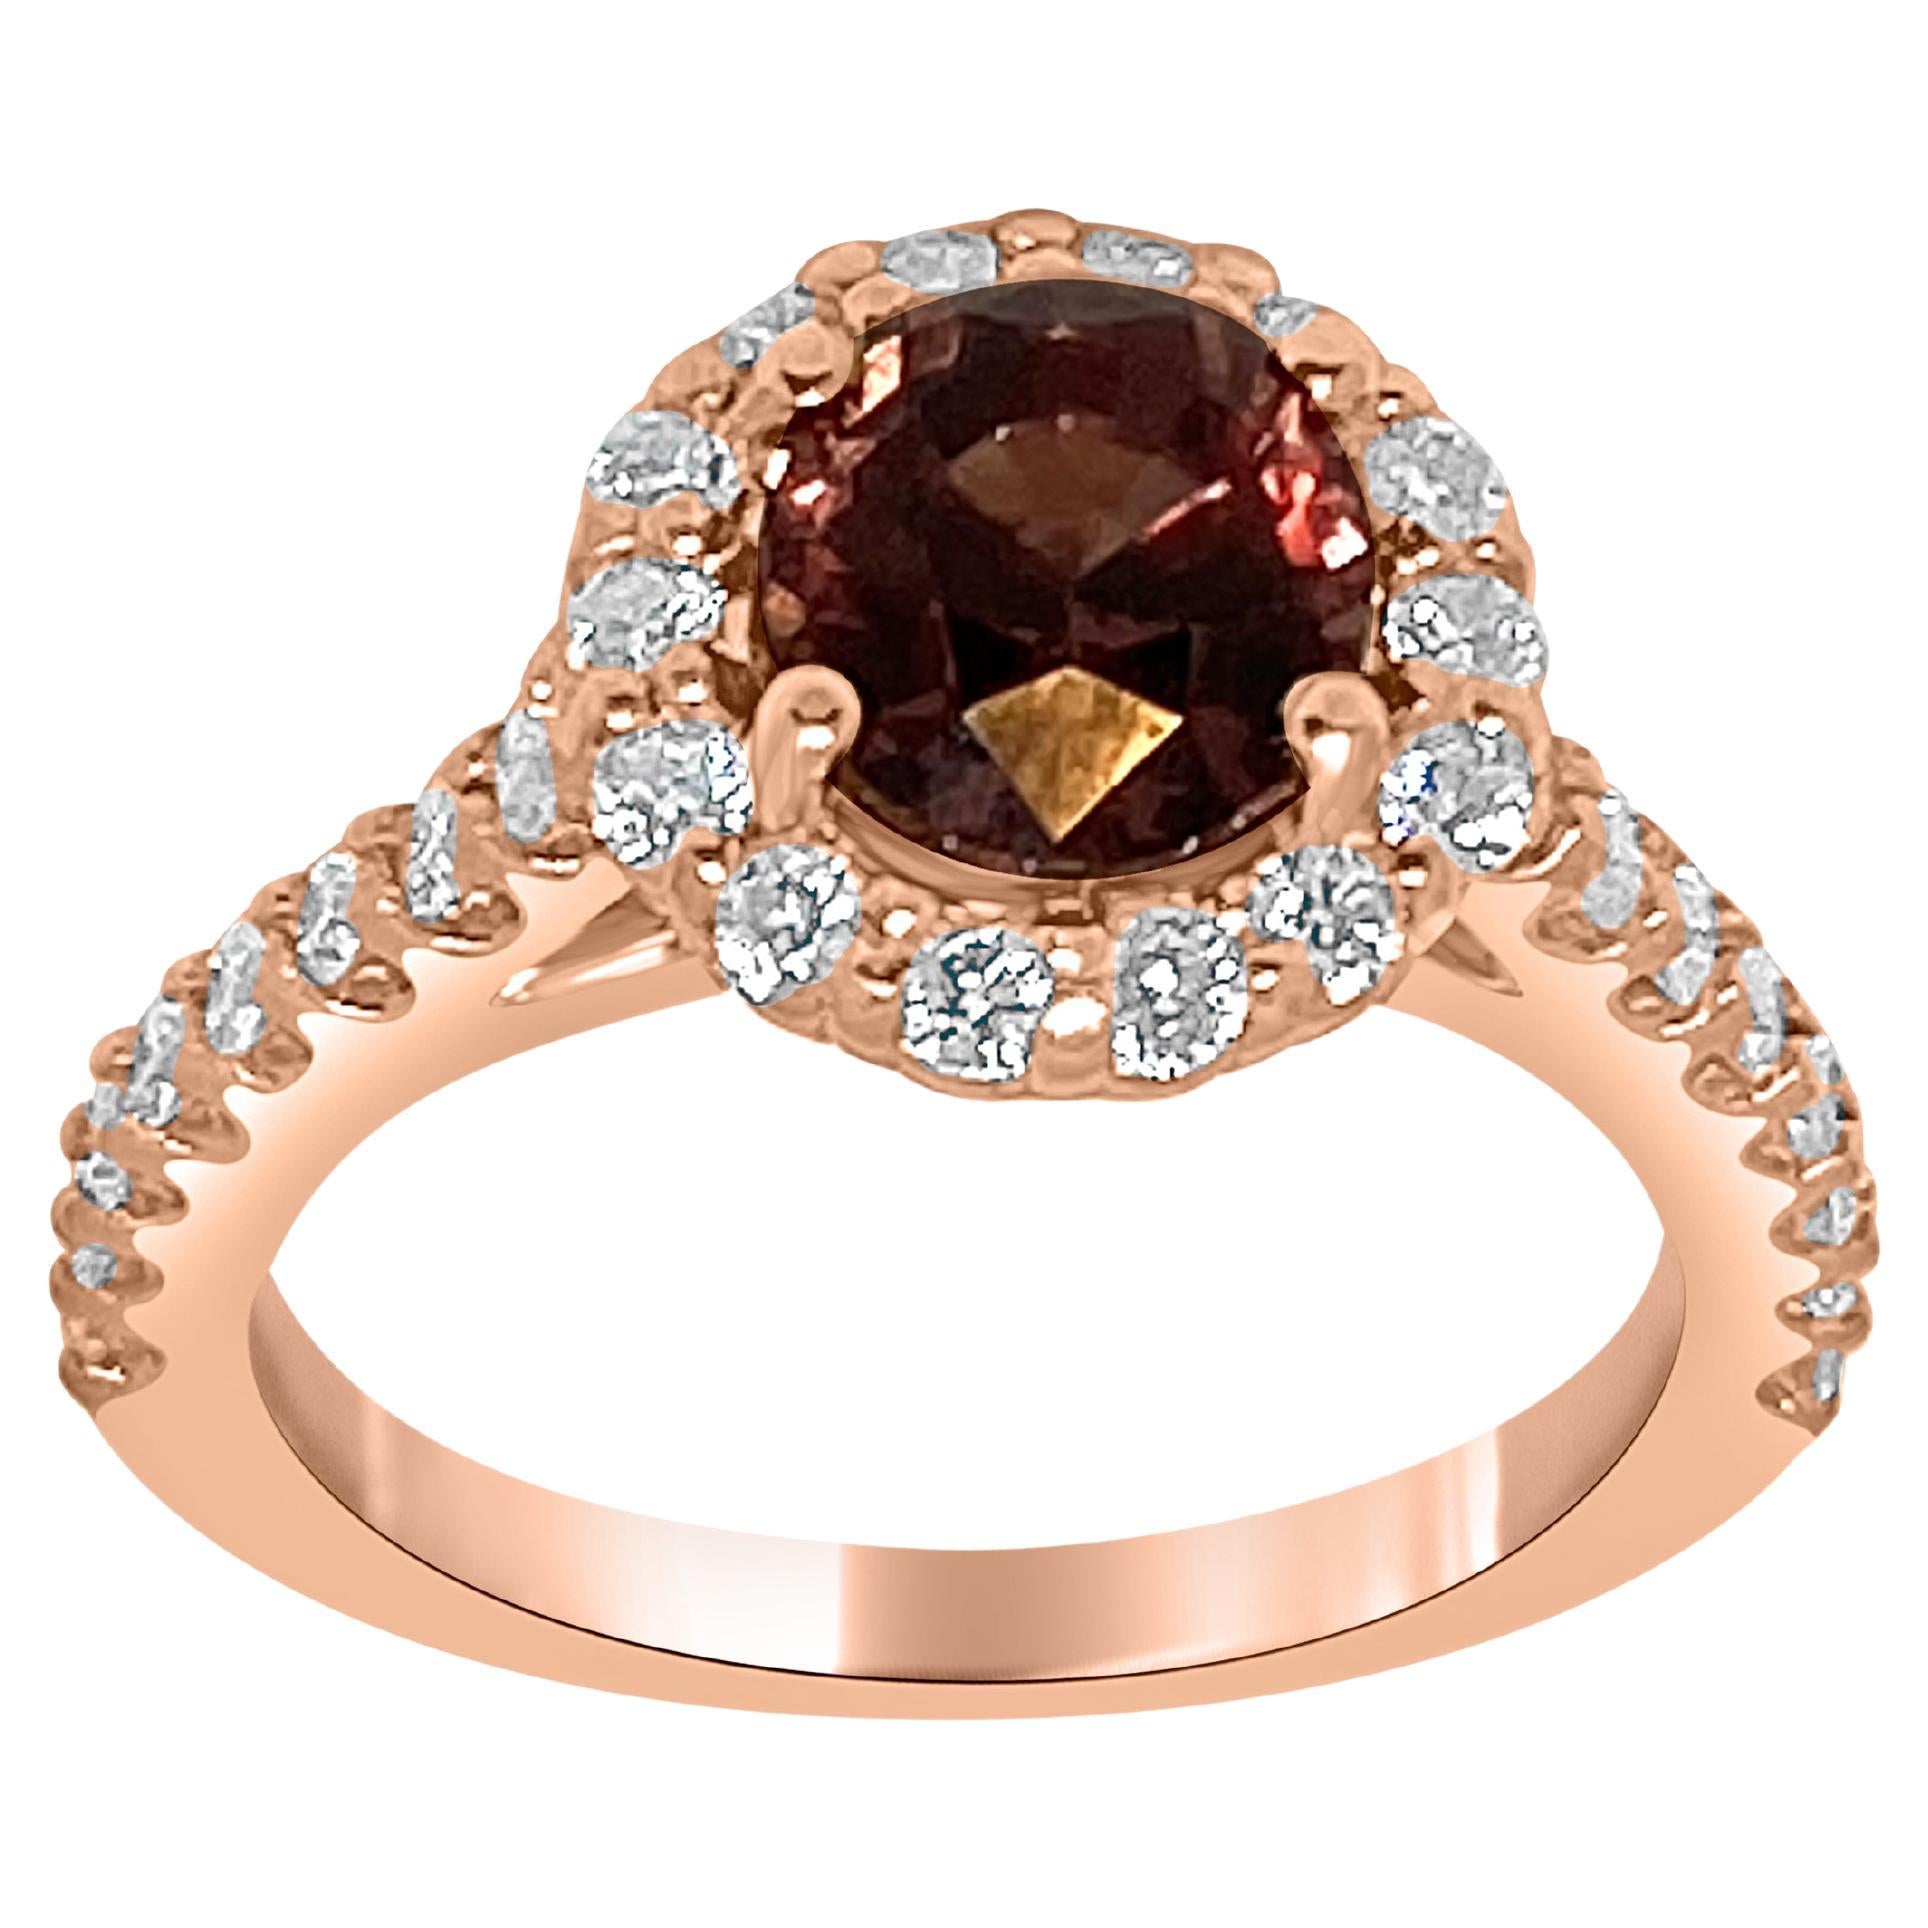 Bochic Red hot Sapphire cluster ring. 
18 K Gold 
Diamond Cluster. 
Sapphire is 3.87 Carat natural Sri Lankan unheated fancy red color. 
Diamonds 1.34 
G color 
VS clarity
Signed 18 K Bochic 
750 Gold 
Comes with Bochic pouch 